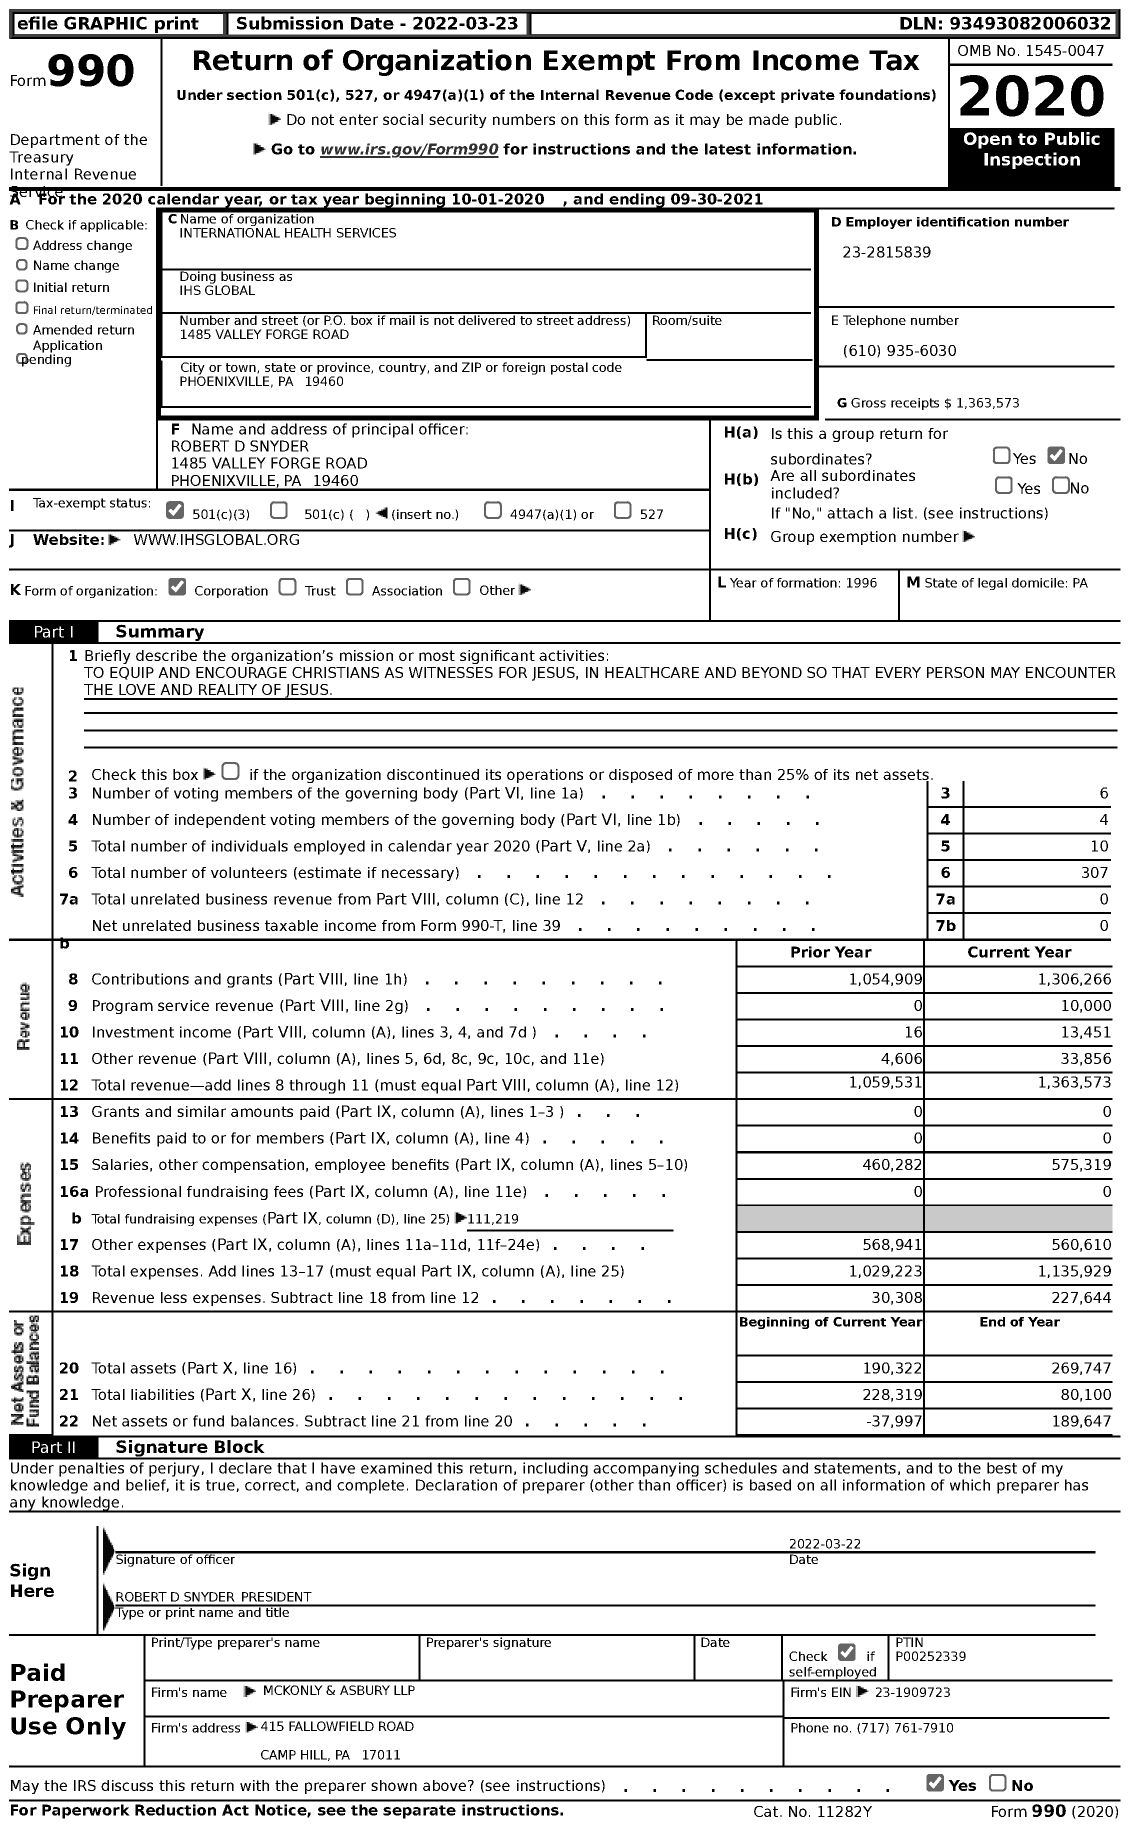 Image of first page of 2020 Form 990 for IHS Global